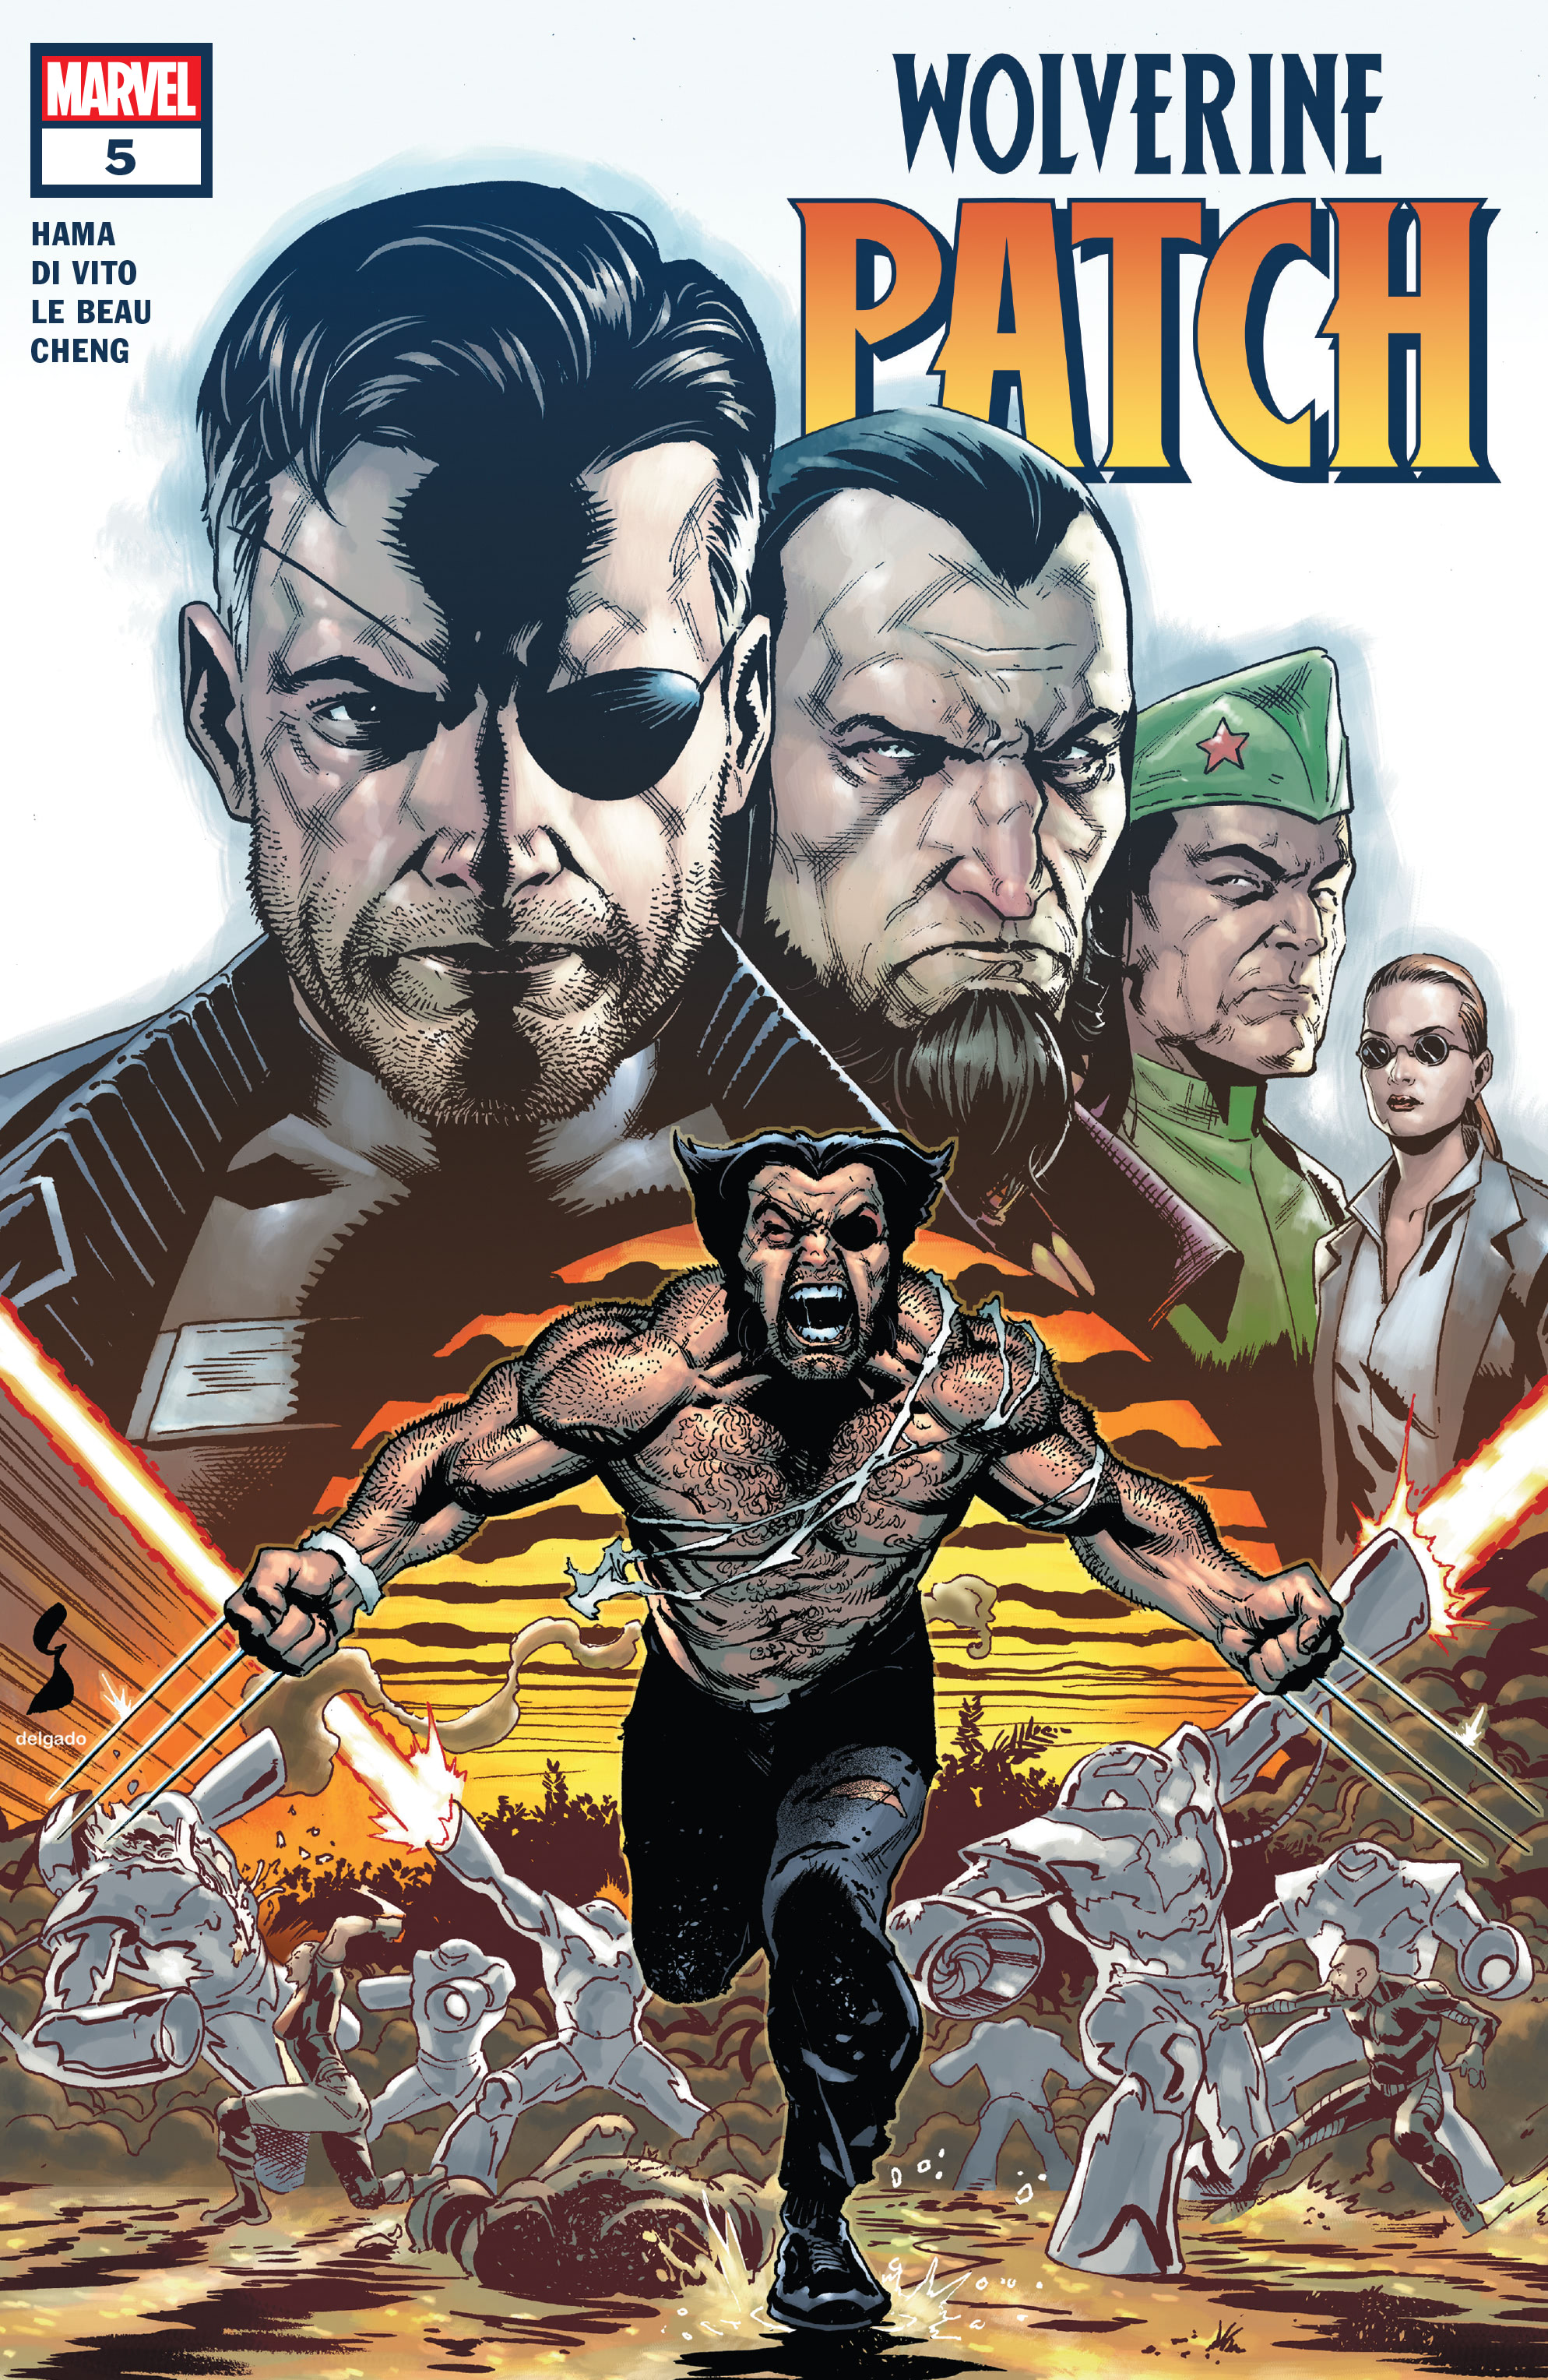 Read online Wolverine: Patch comic -  Issue #5 - 1